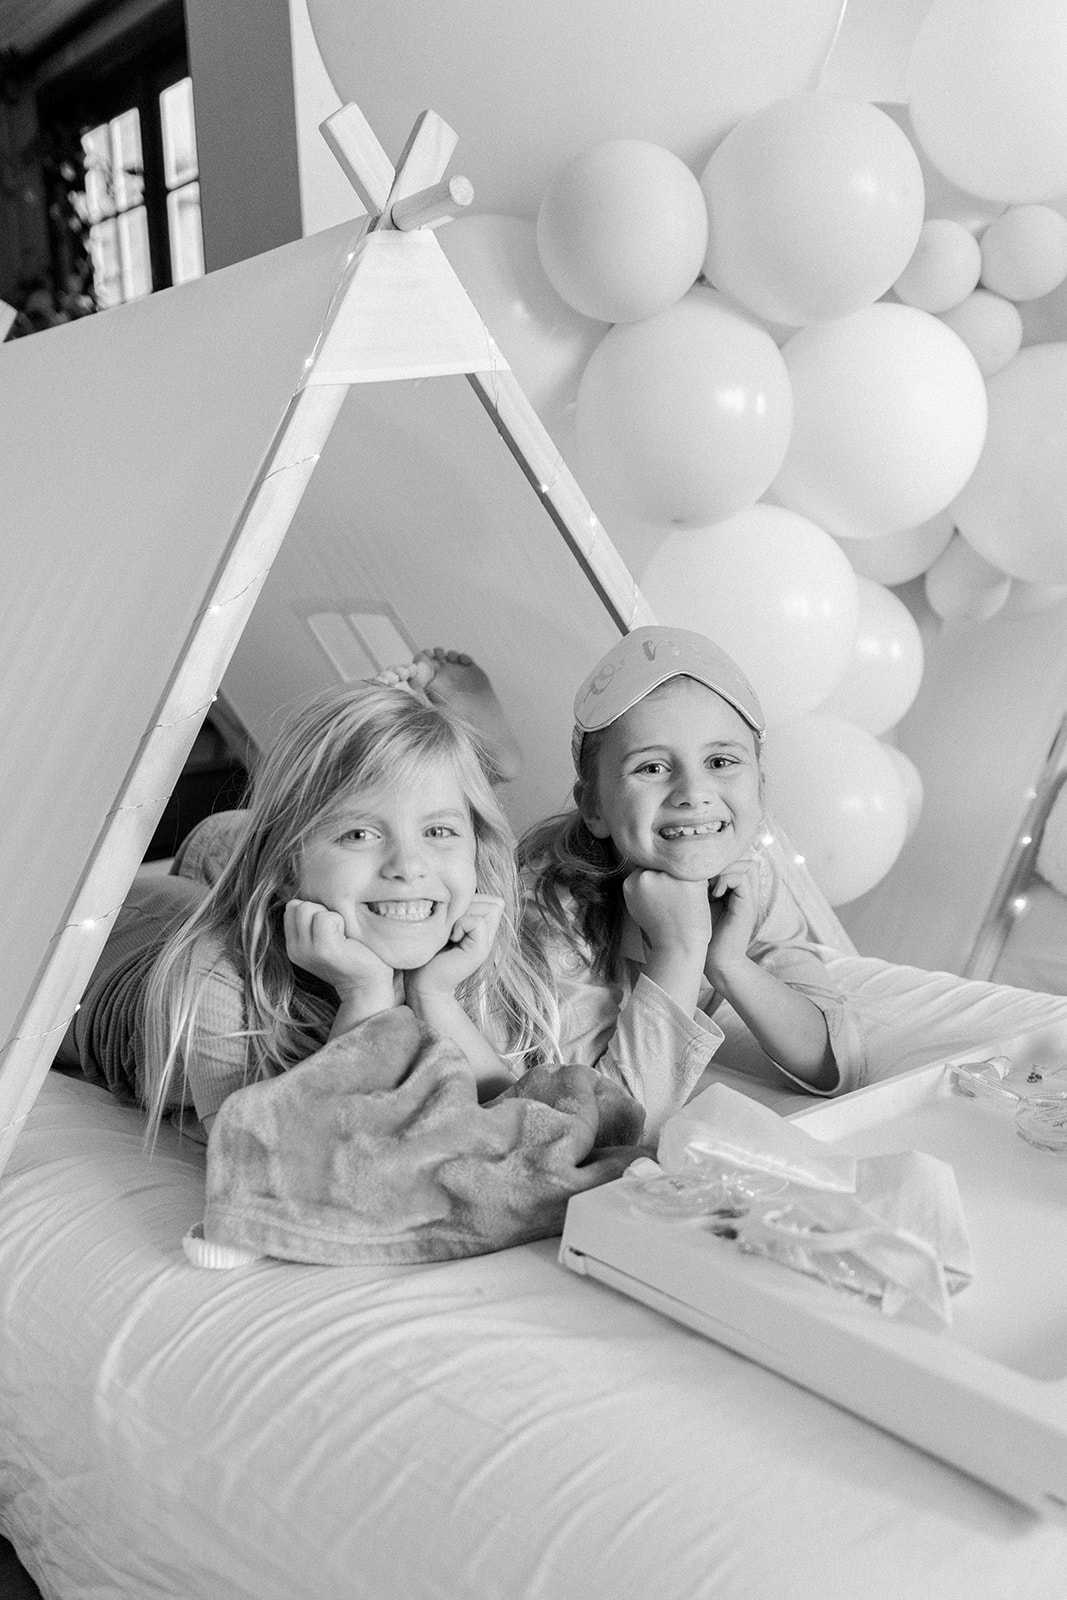 blue and white themed sleepover birthday party